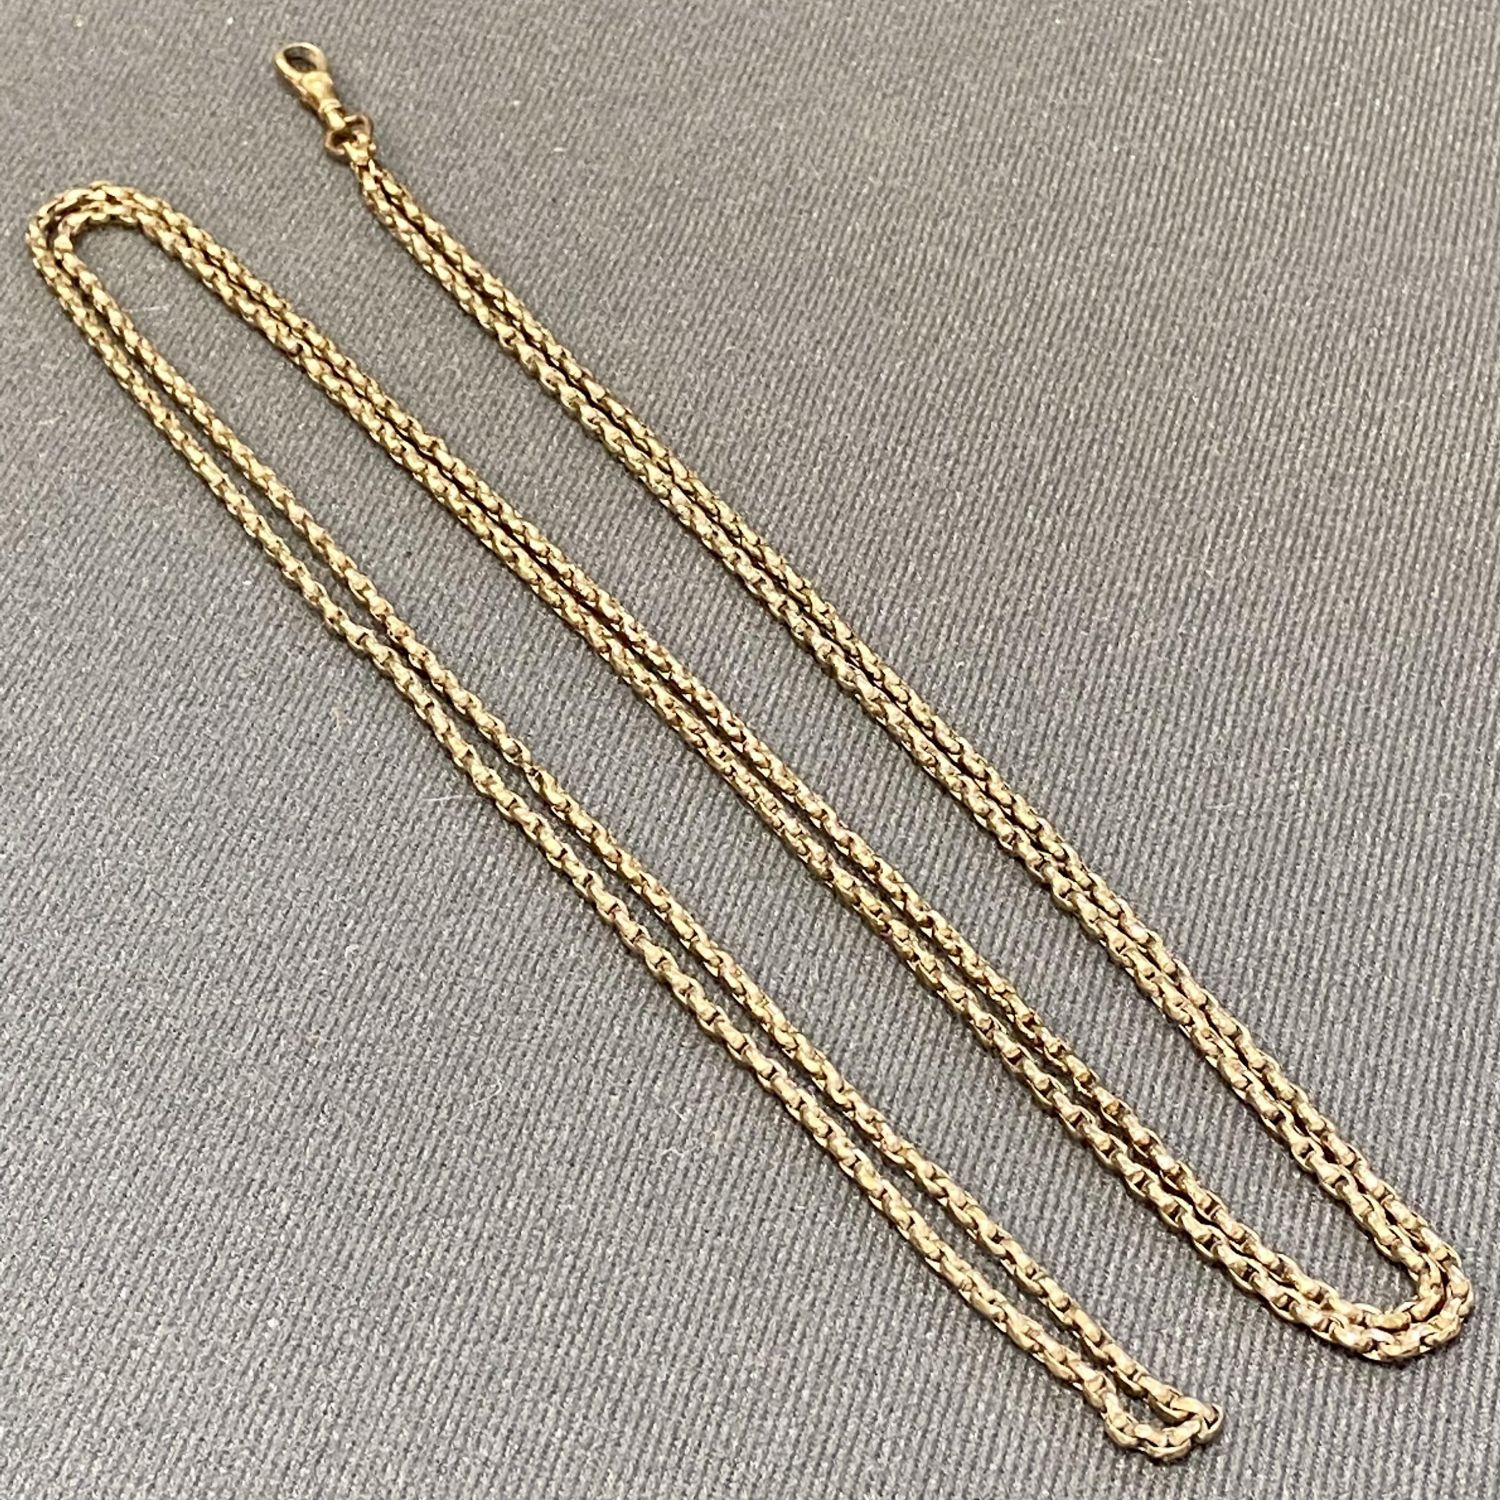 Guard Chain - Jewellery & Gold - Hemswell Antique Centres